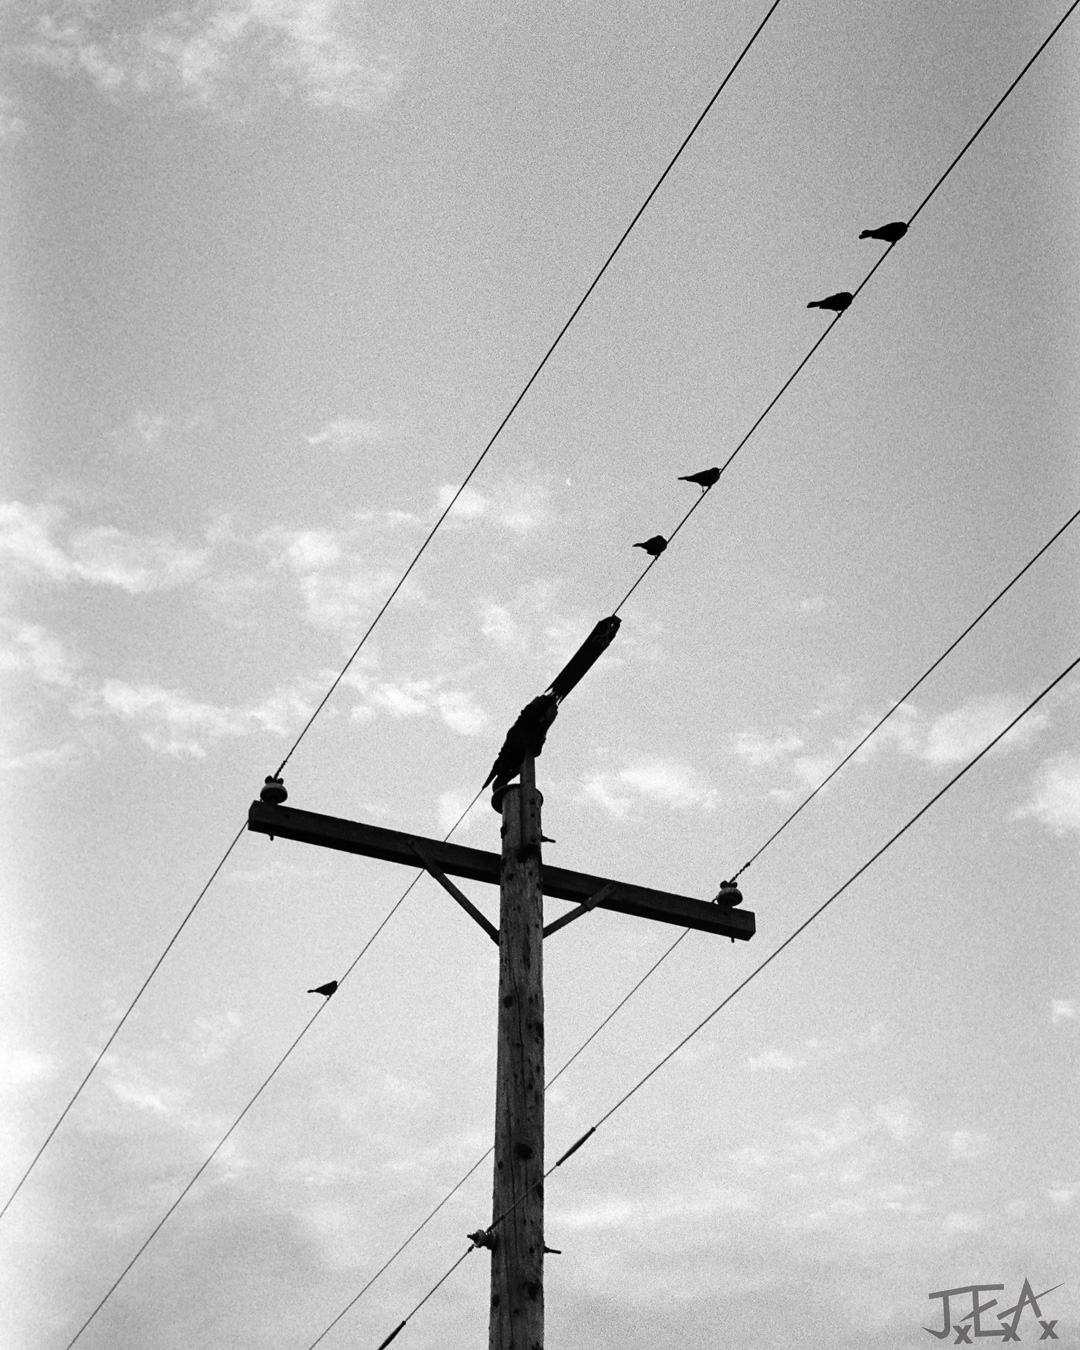 A picture looking up at small birds sitting on top of a powerline.